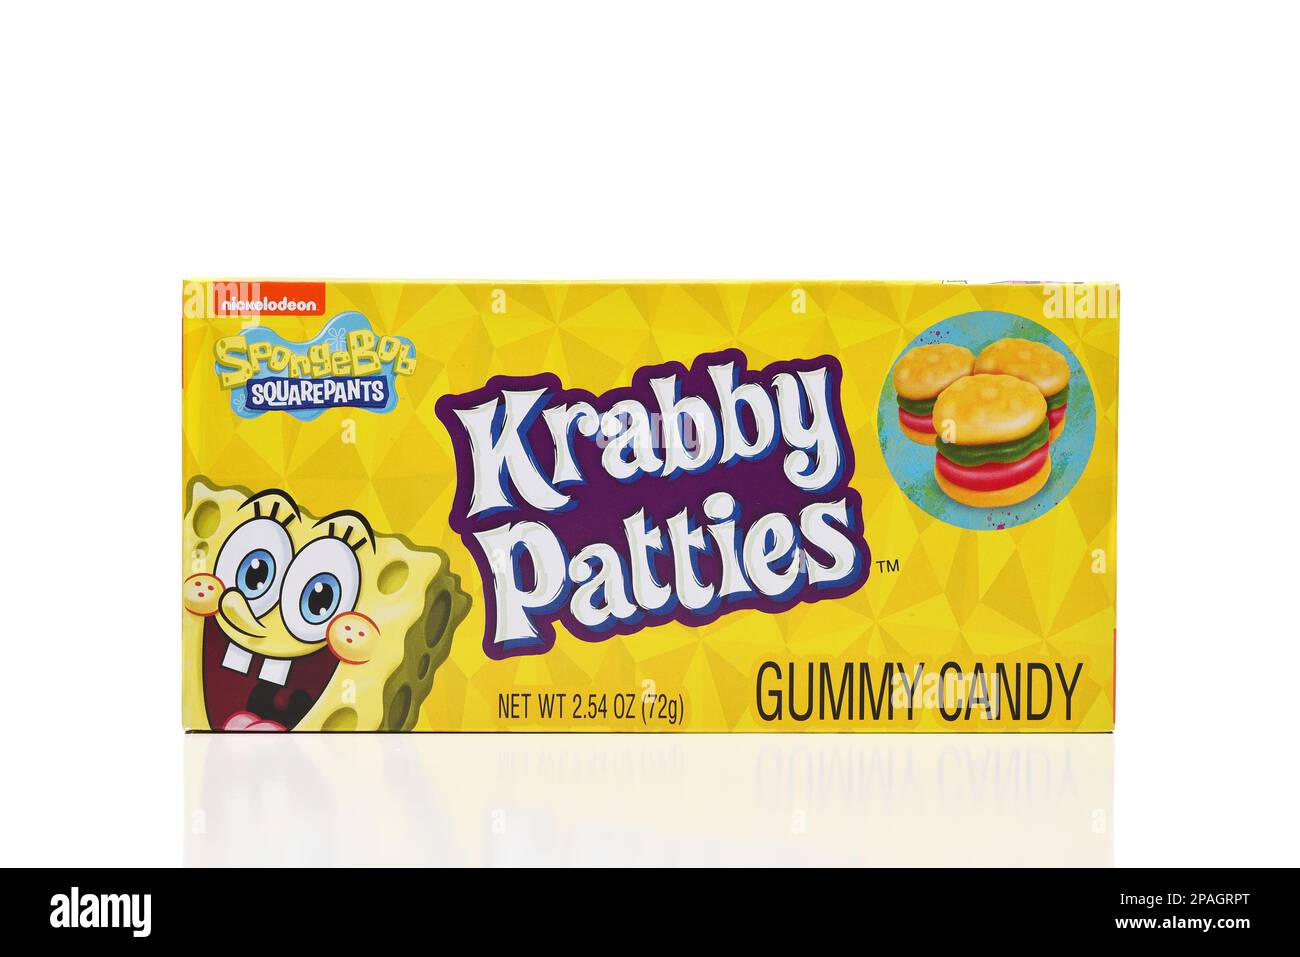 IRVINE, CALIFORNIA - 11 MAR 2023: A box of Krabby Patties Gummy Candy, from Nickelodeon and Sponge Bob Square Pants Stock Photo